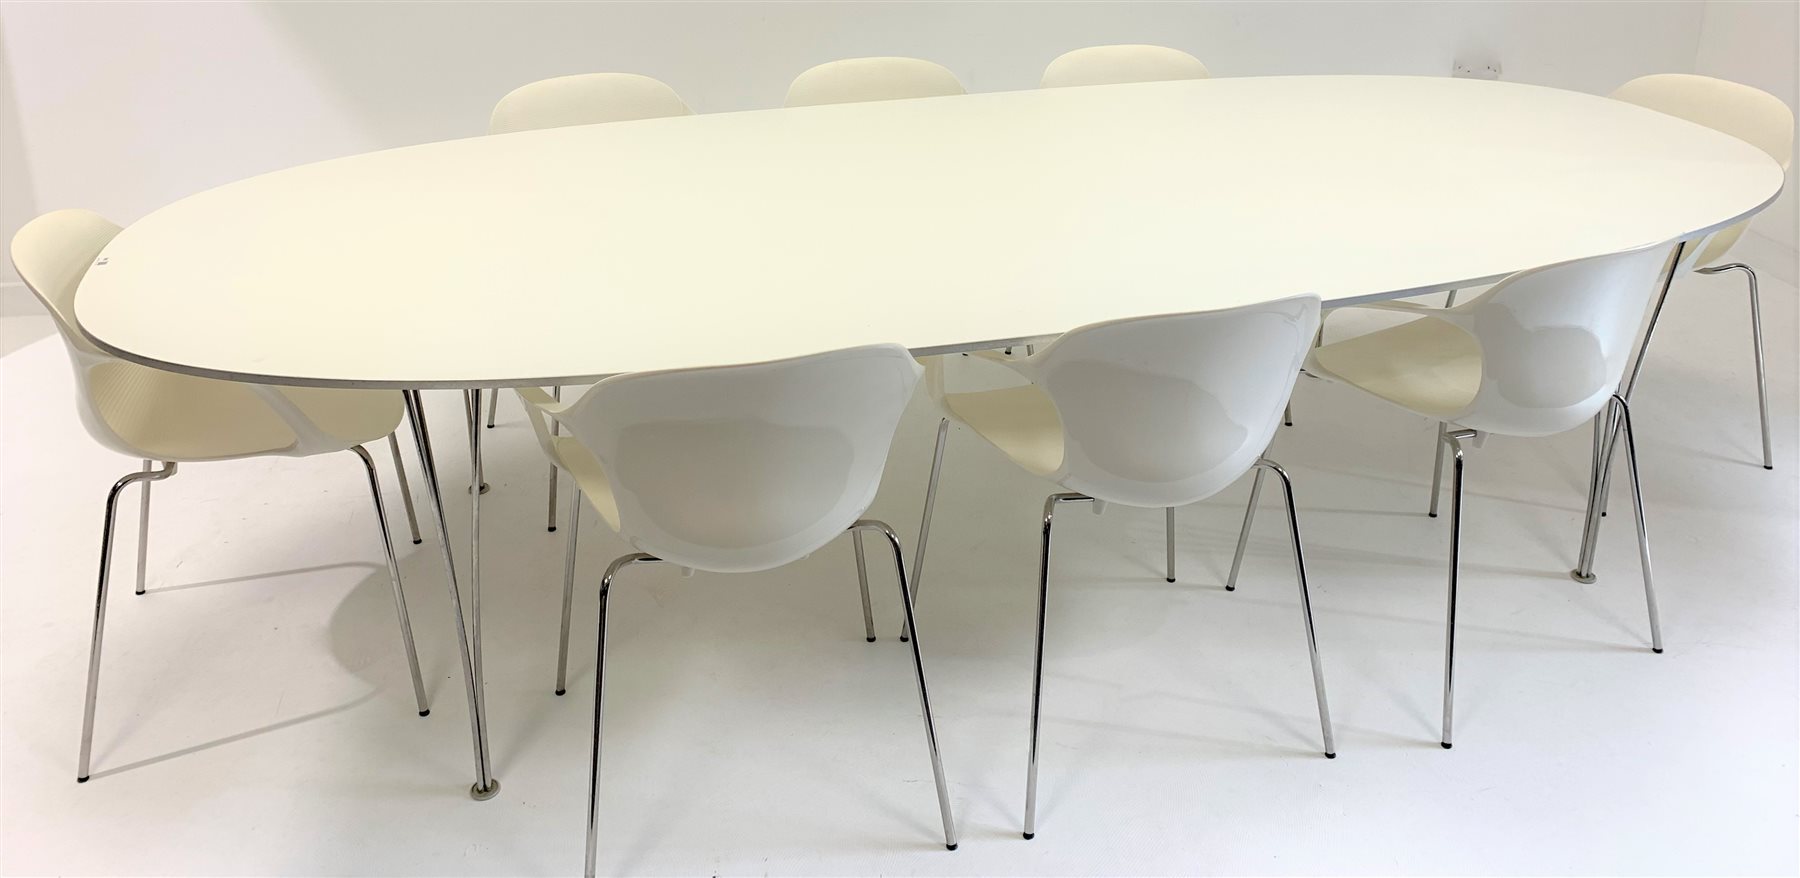 Arne Jacobson et al. for Fritz Hansen - Contemporary 'Super Elliptical' dining table with white lam